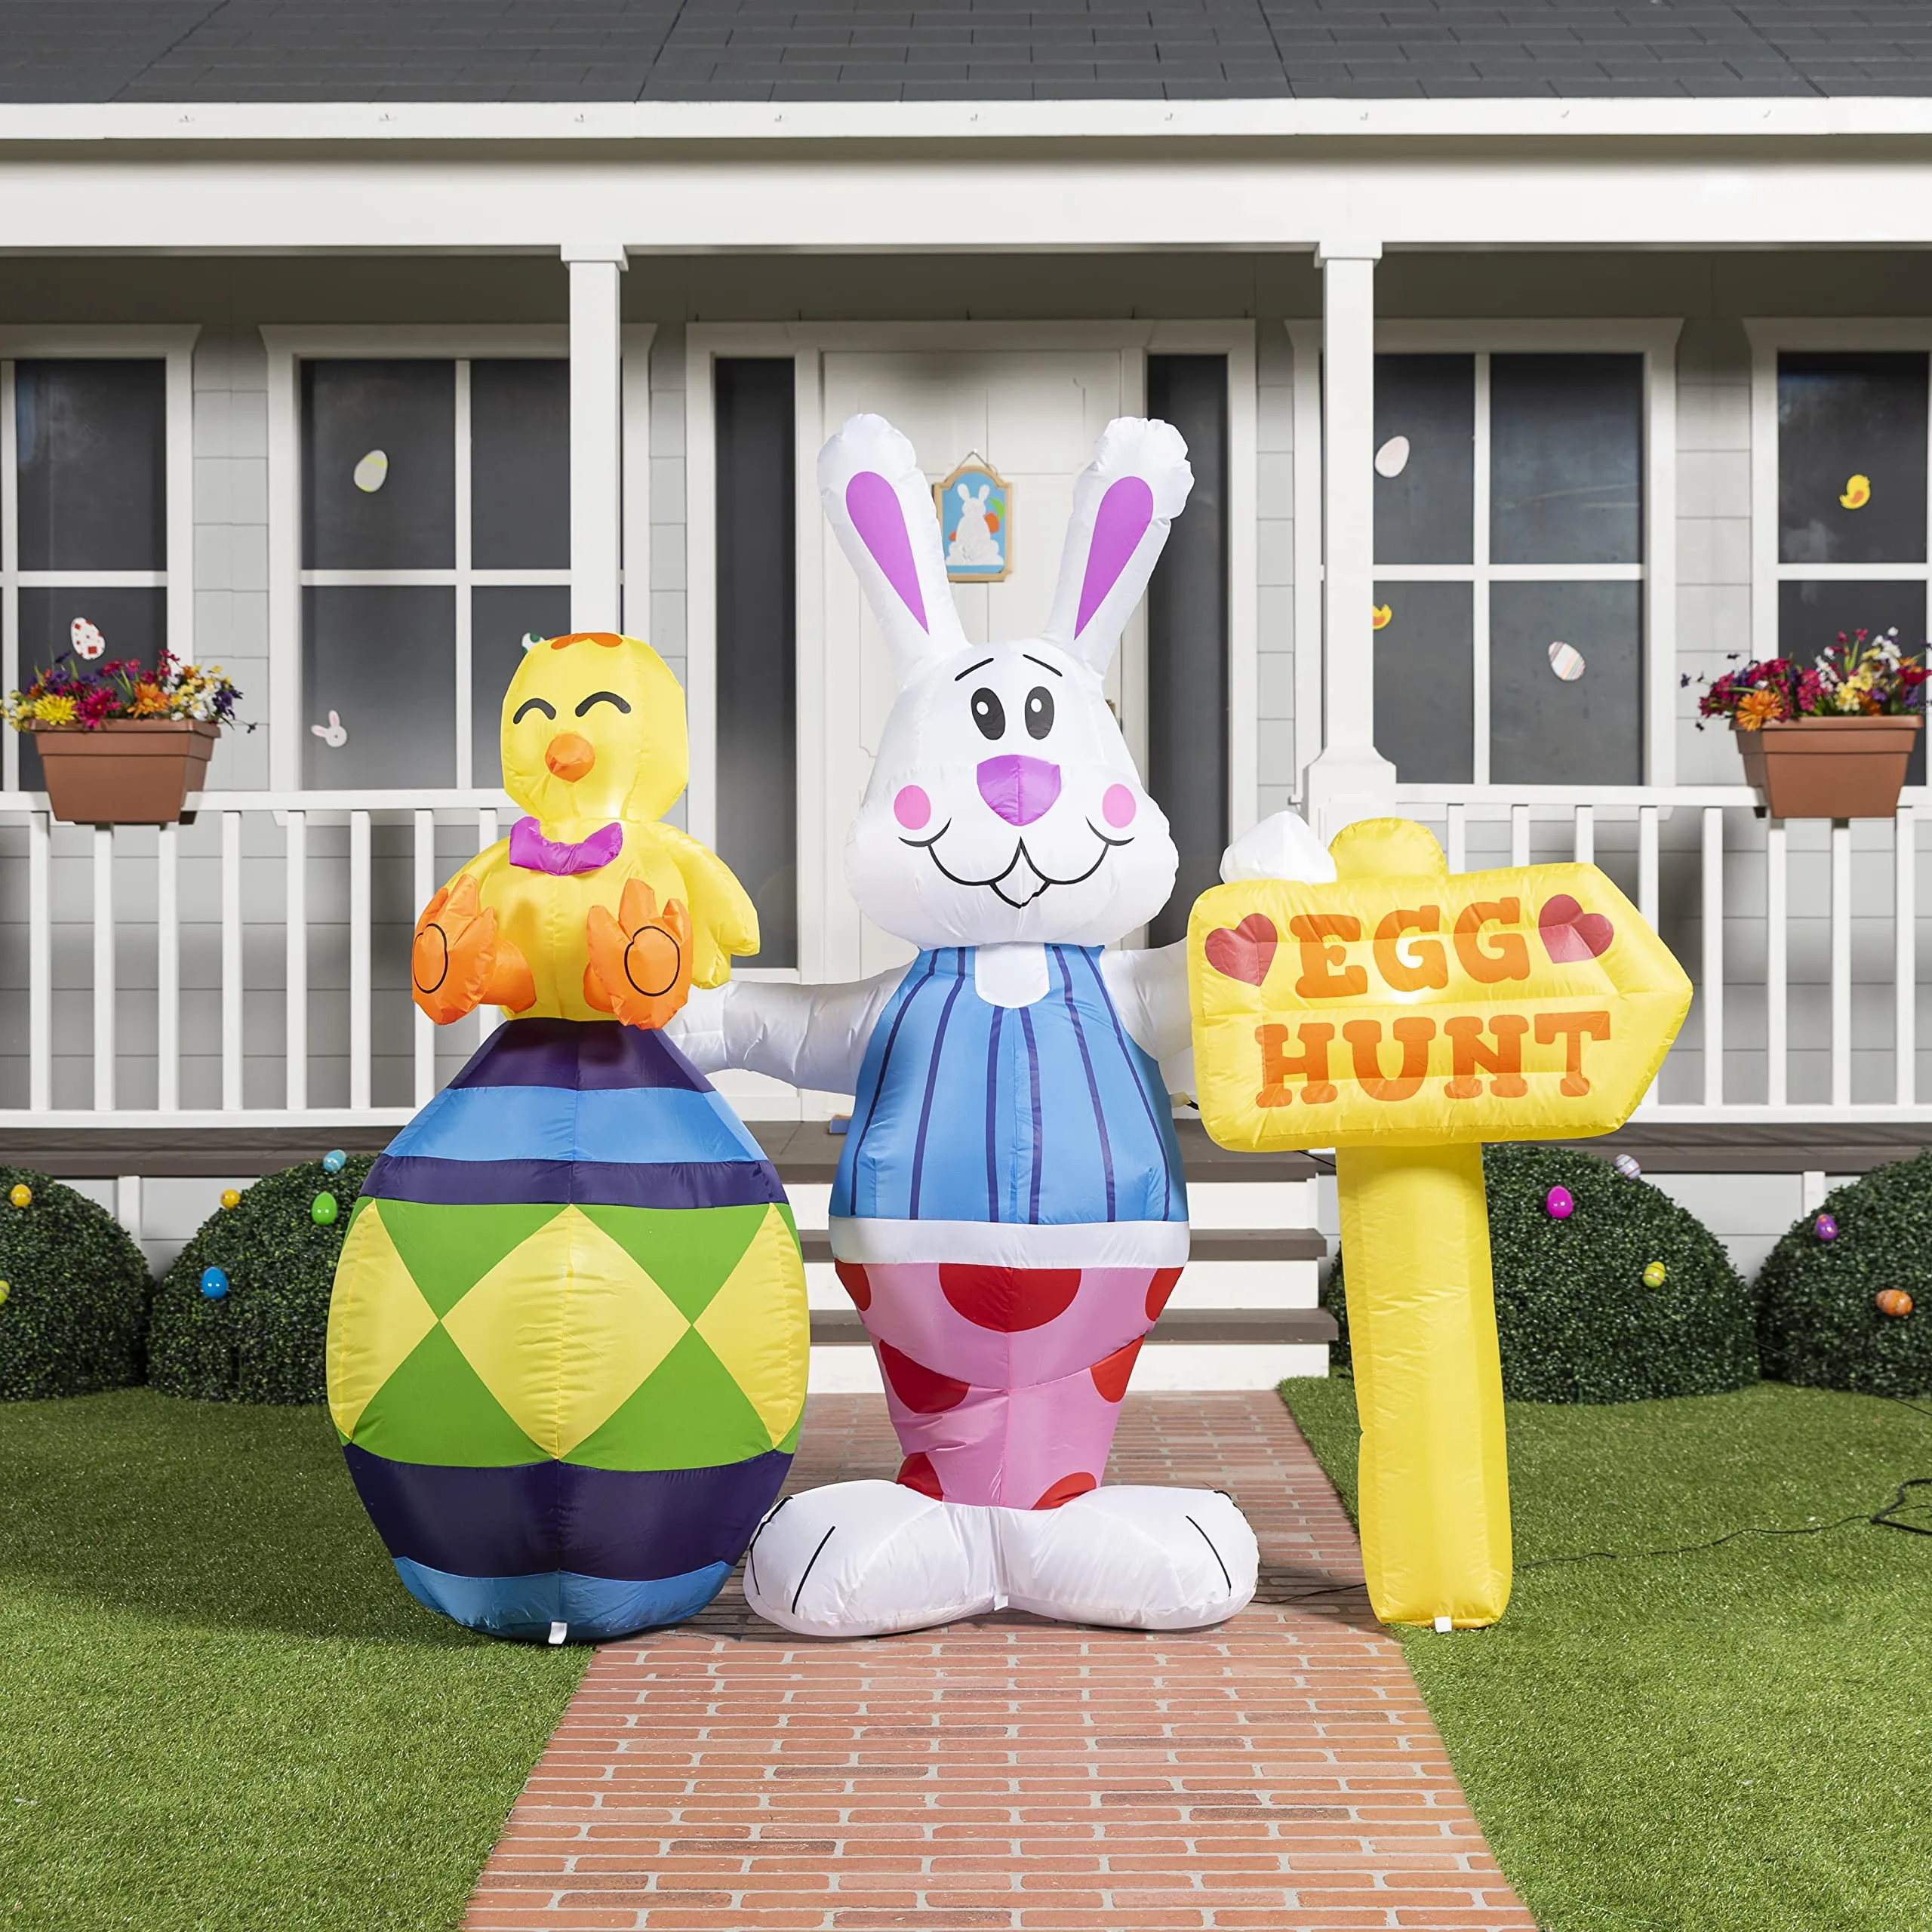 You are currently viewing How can I secure my inflatable Easter decorations against wind and weather?